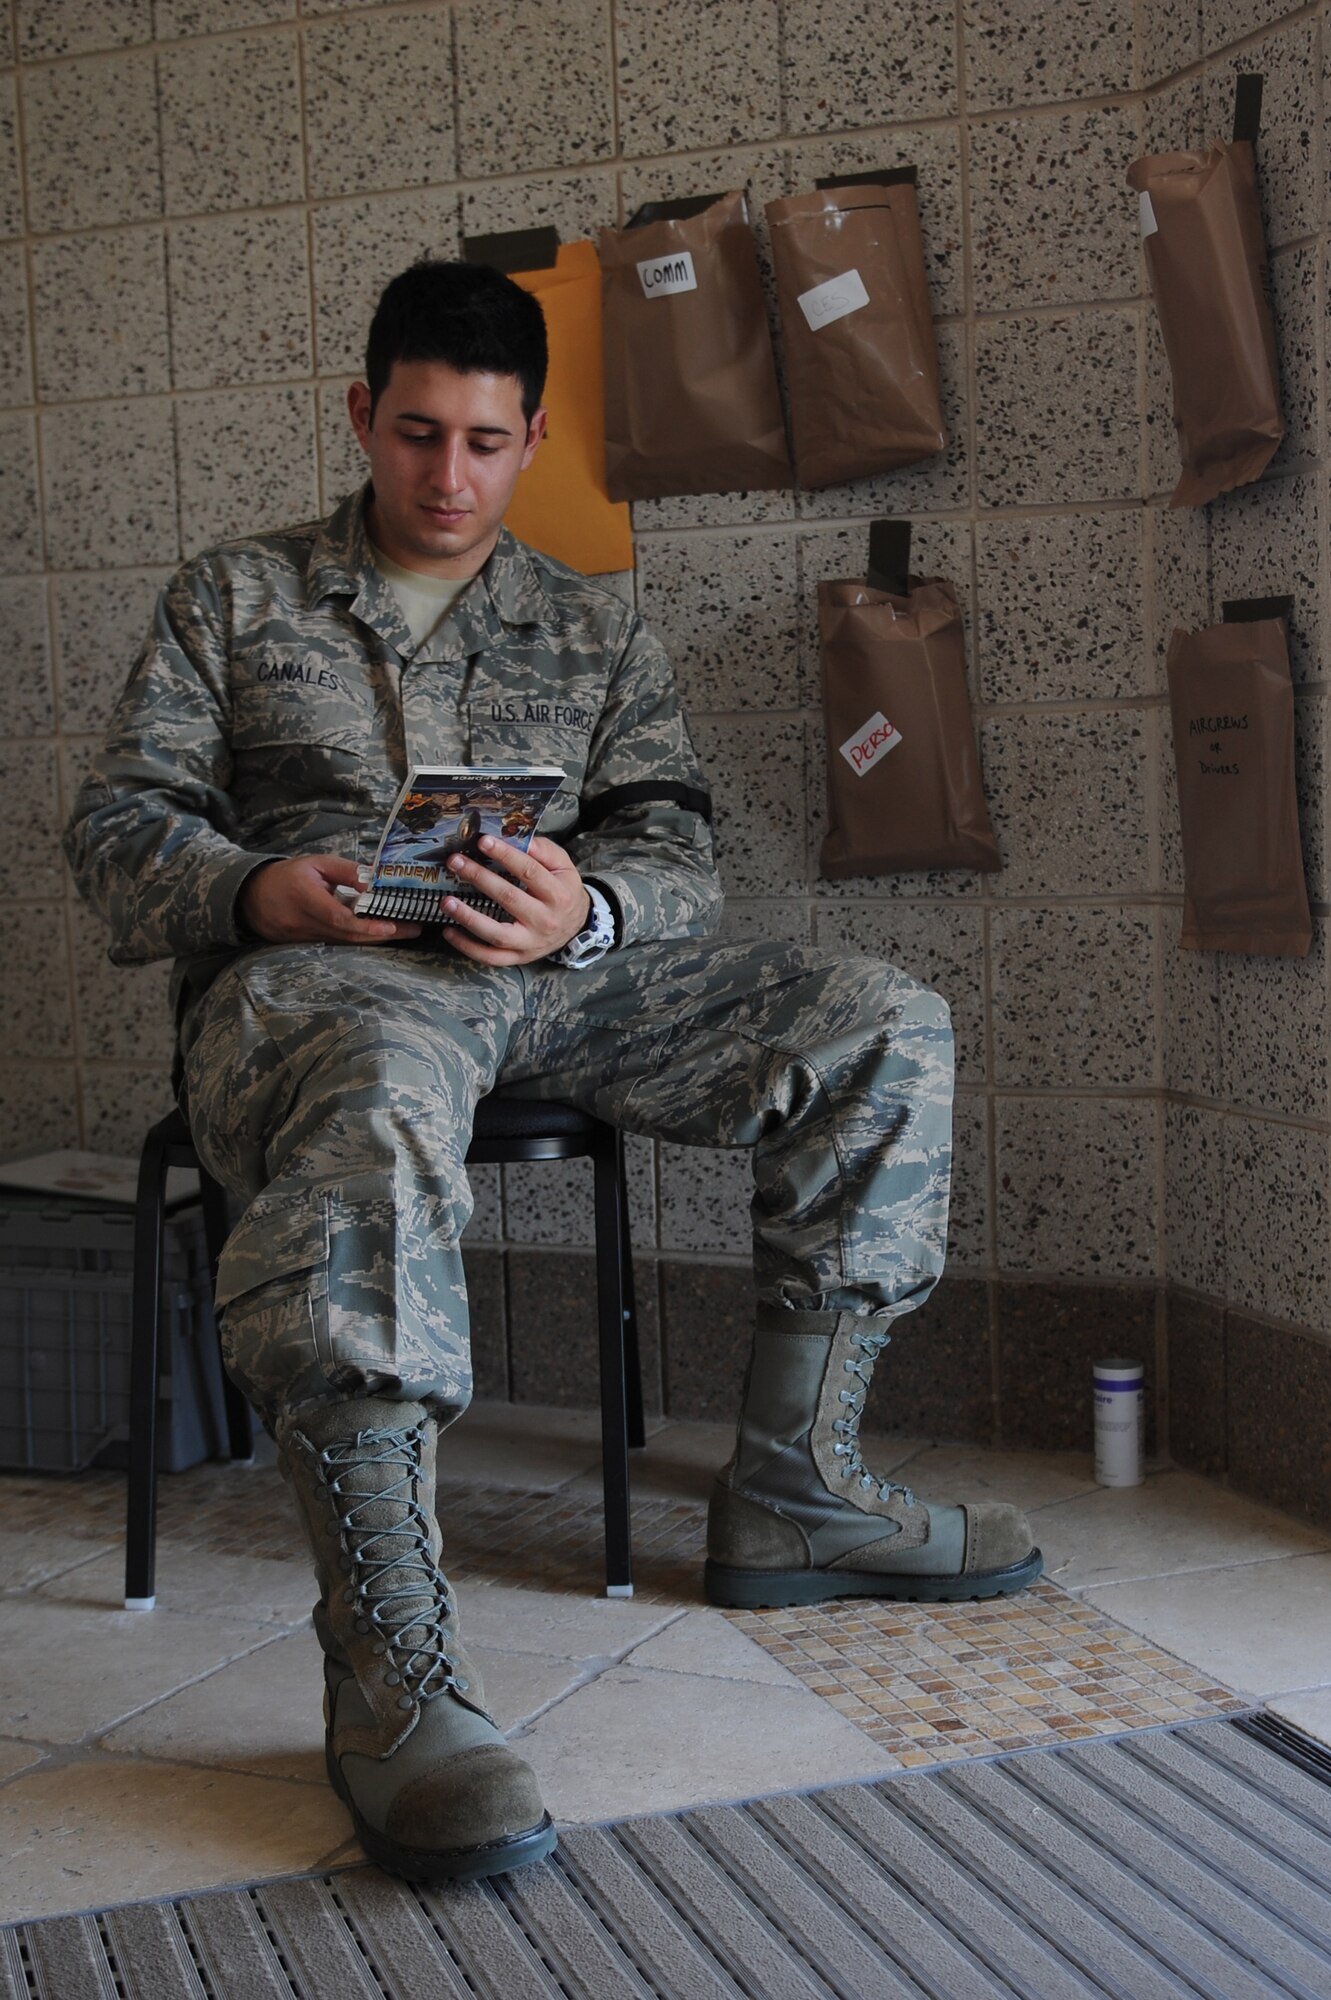 Senior Airman Marco Canales, a 19th Force Support Squadron career management specialist, reviews his Airman's Manual Sept. 10, 2011, at an entry-control point at volk Field, Wis. Little Rock AFB Airmen are participating in an operational readiness exercise to prepare for an upcoming operation readiness inspection in October.